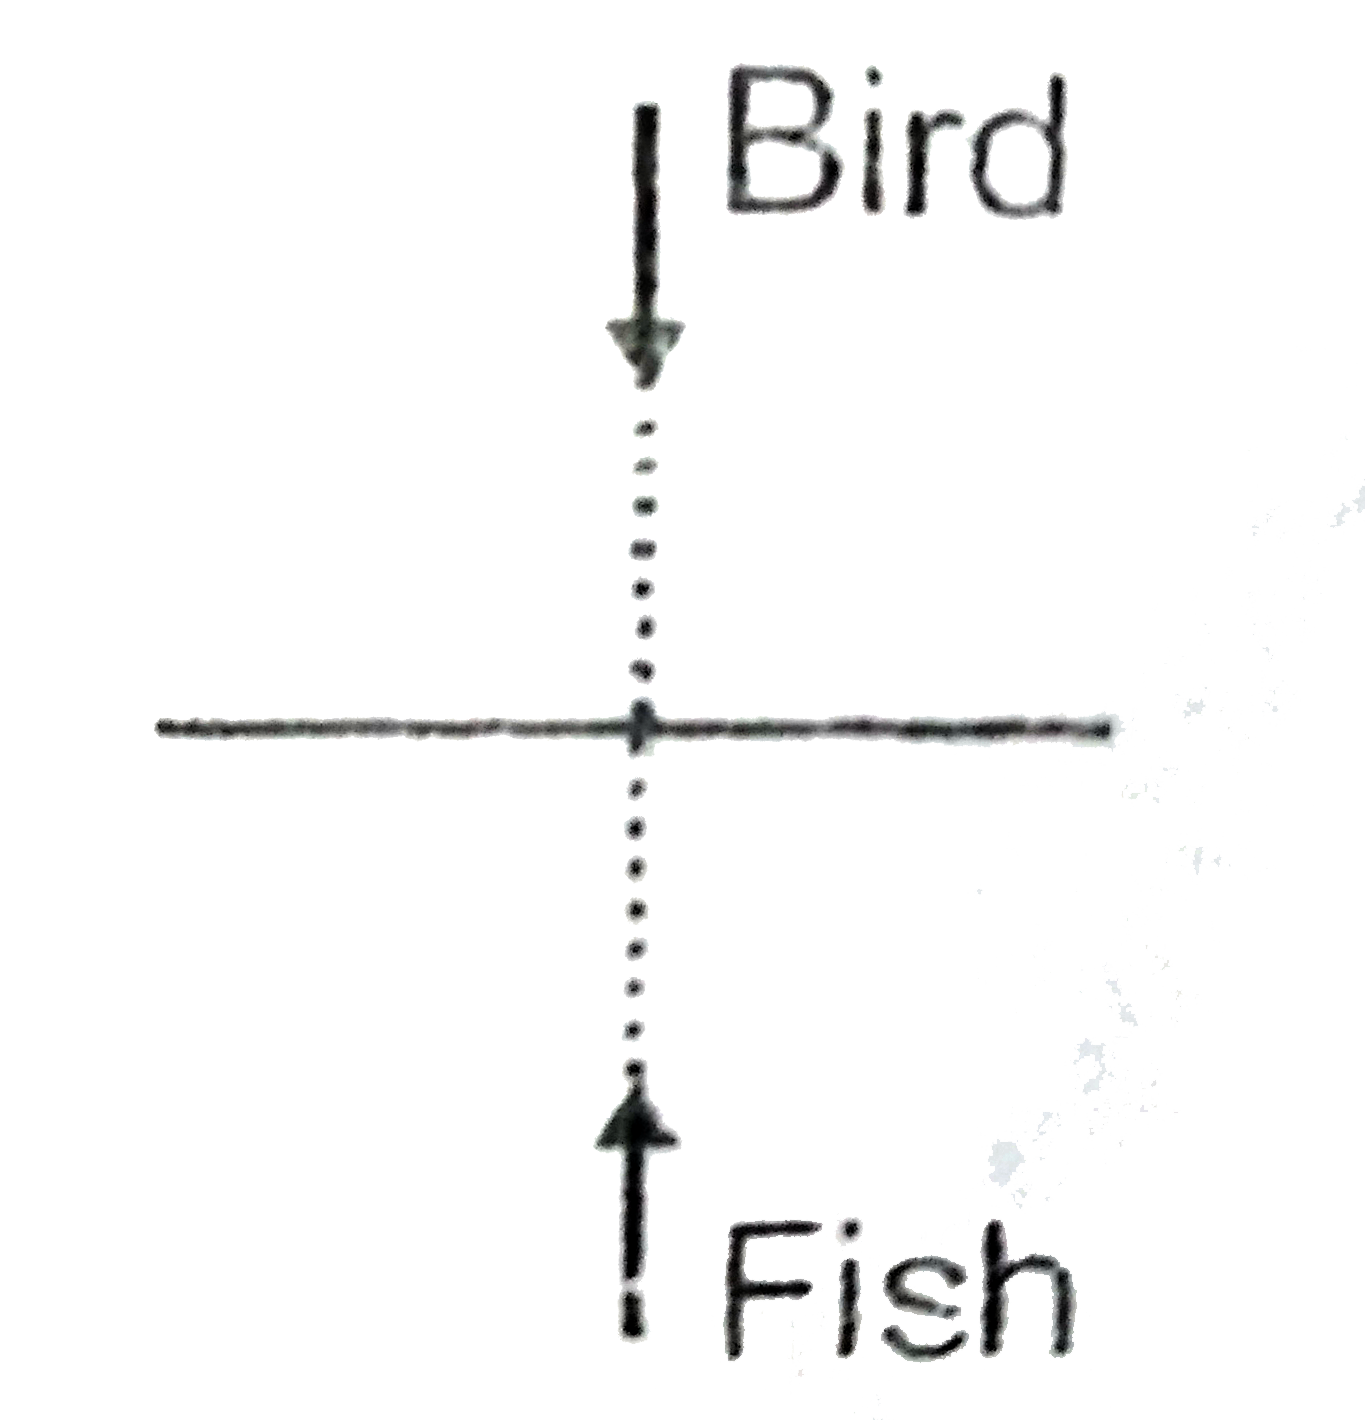 A fish is moving up vertically with speed 4 cm/s inside a pond. A bird is moving vertically downward (see figure). Velocity of the bird w.r.t. fish is 16 cm/s downward. Find out the actual velocity of the bird (in cm/s). Given refractive index of water is (4)/(3).